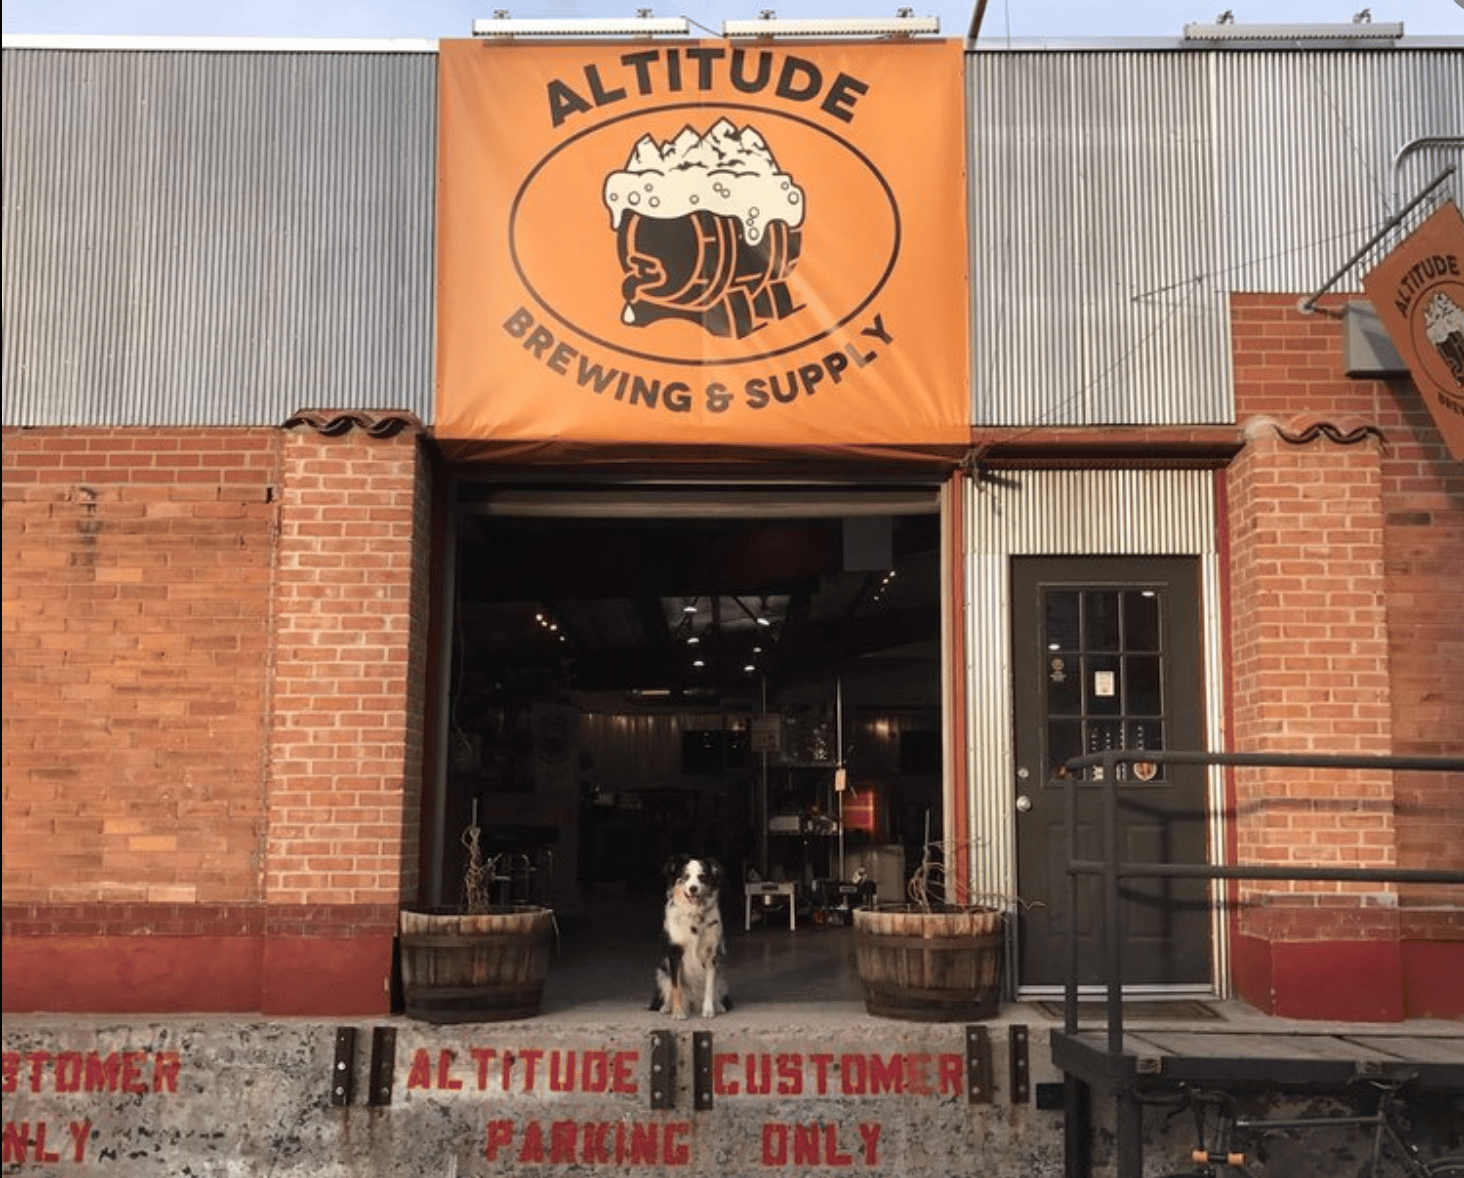 Black and white dog sitting in front of warehouse garage door with yellow Altitude Brewing & Supply banner above